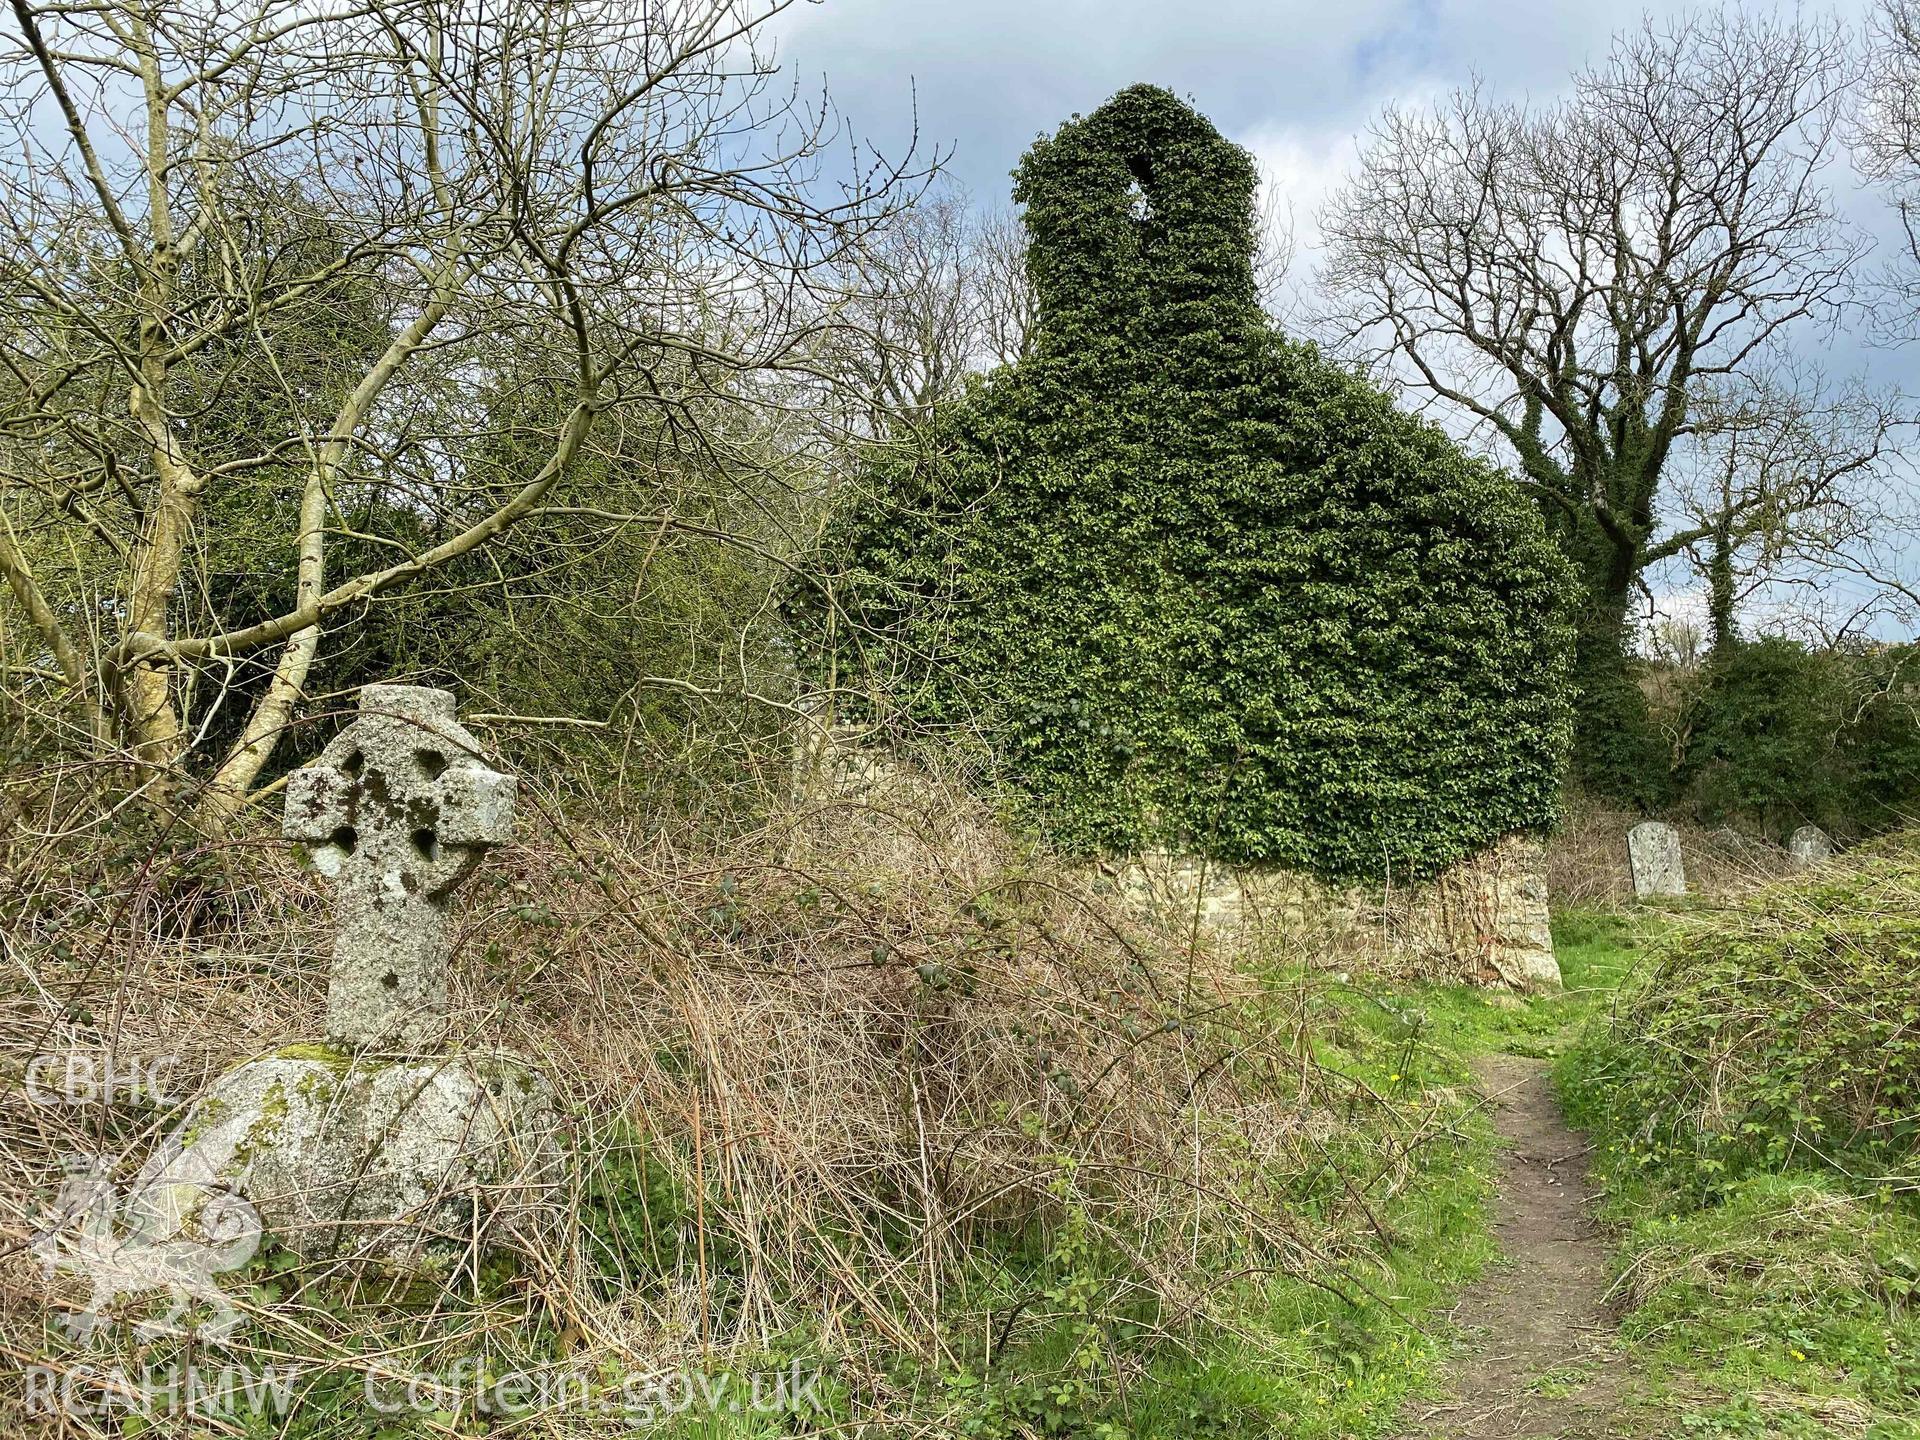 Digital photograph showing ivy covered stone wall of St Justinian's Church, Llanstinian, produced by Paul Davis in 2020